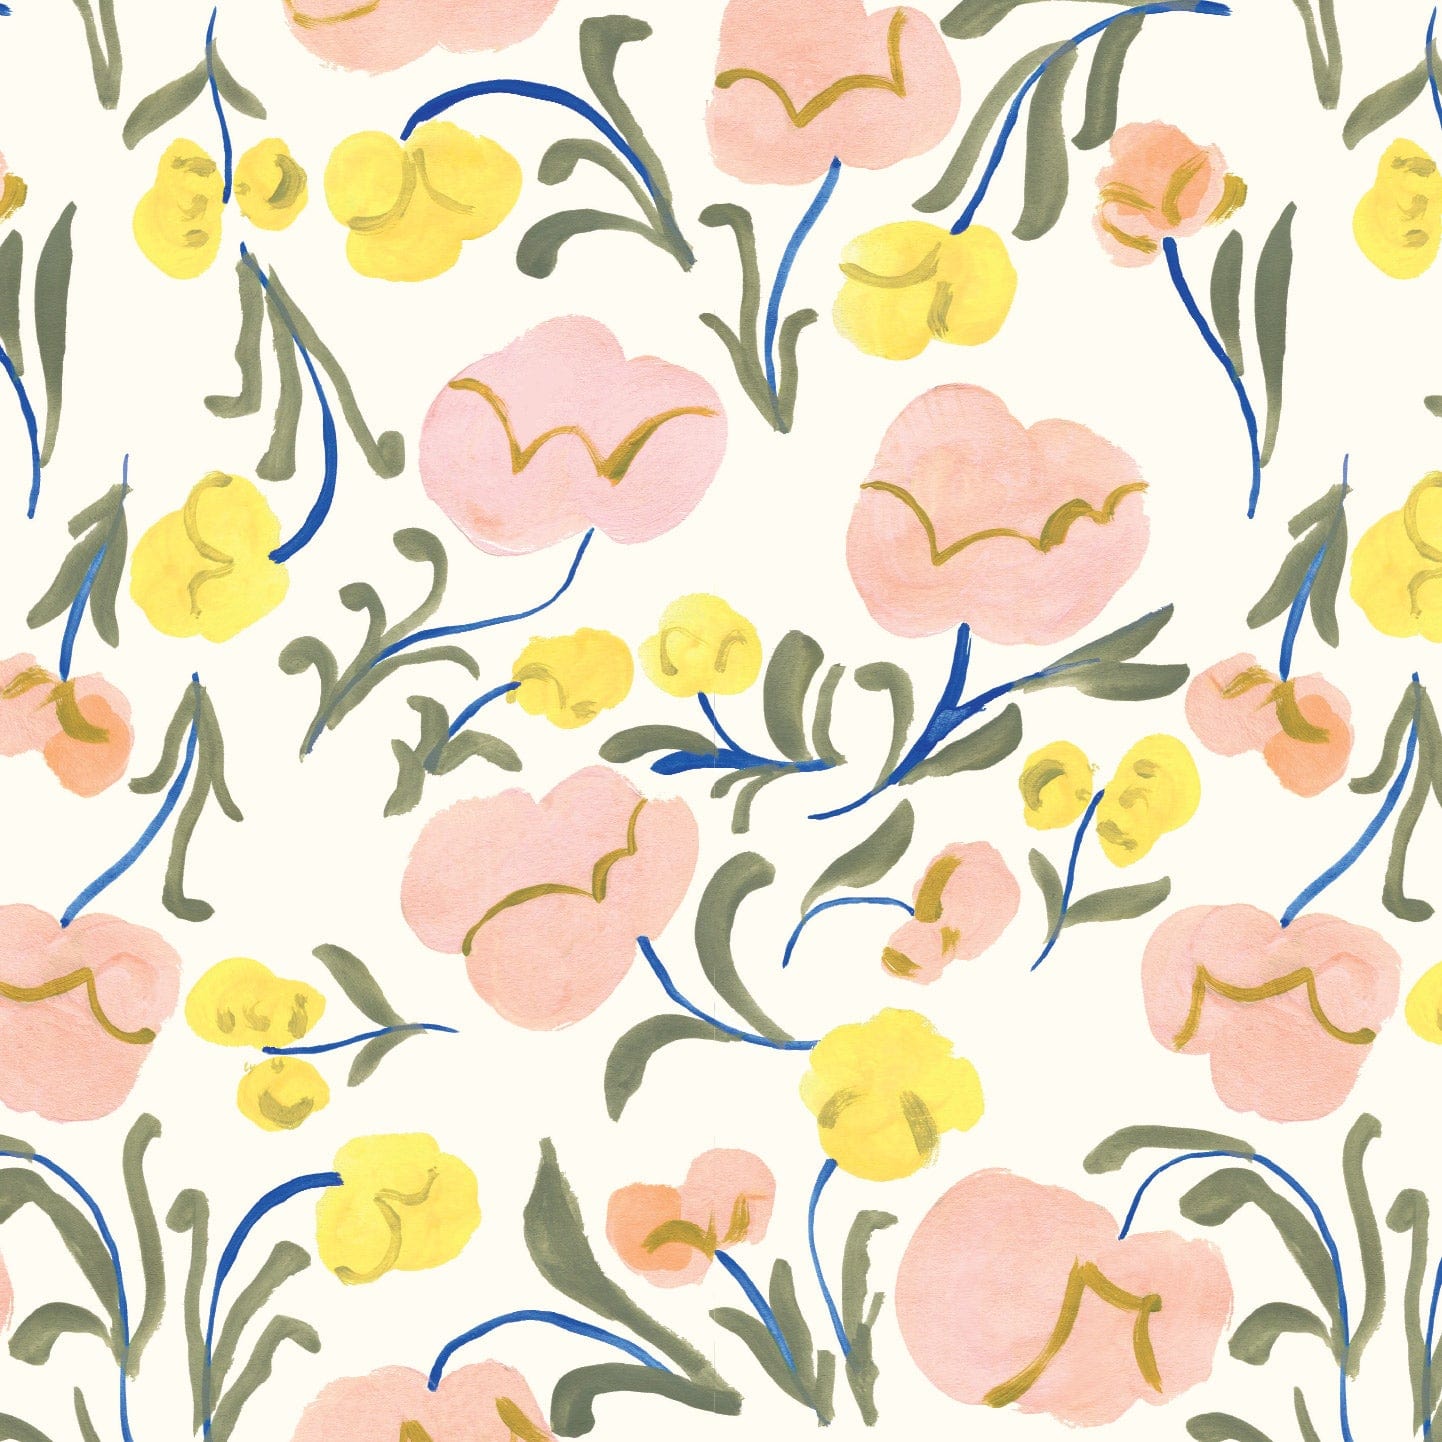 Floral wallpaper with pink and yellow flowers, blue stems and green leaves